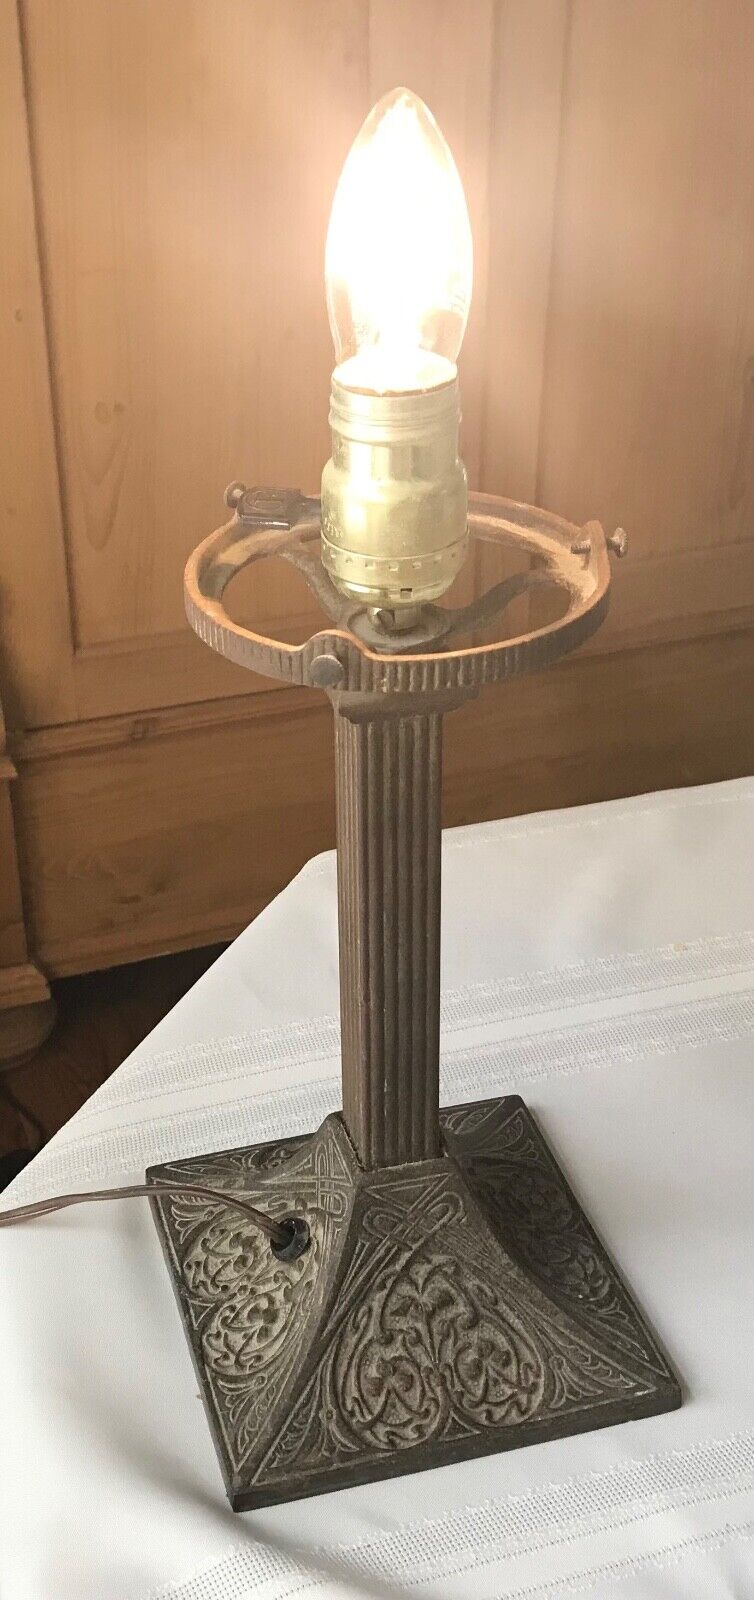 Antique Mission Art Nouveau Table Lamp Nice patina ~ 12 1/2” (without shade)